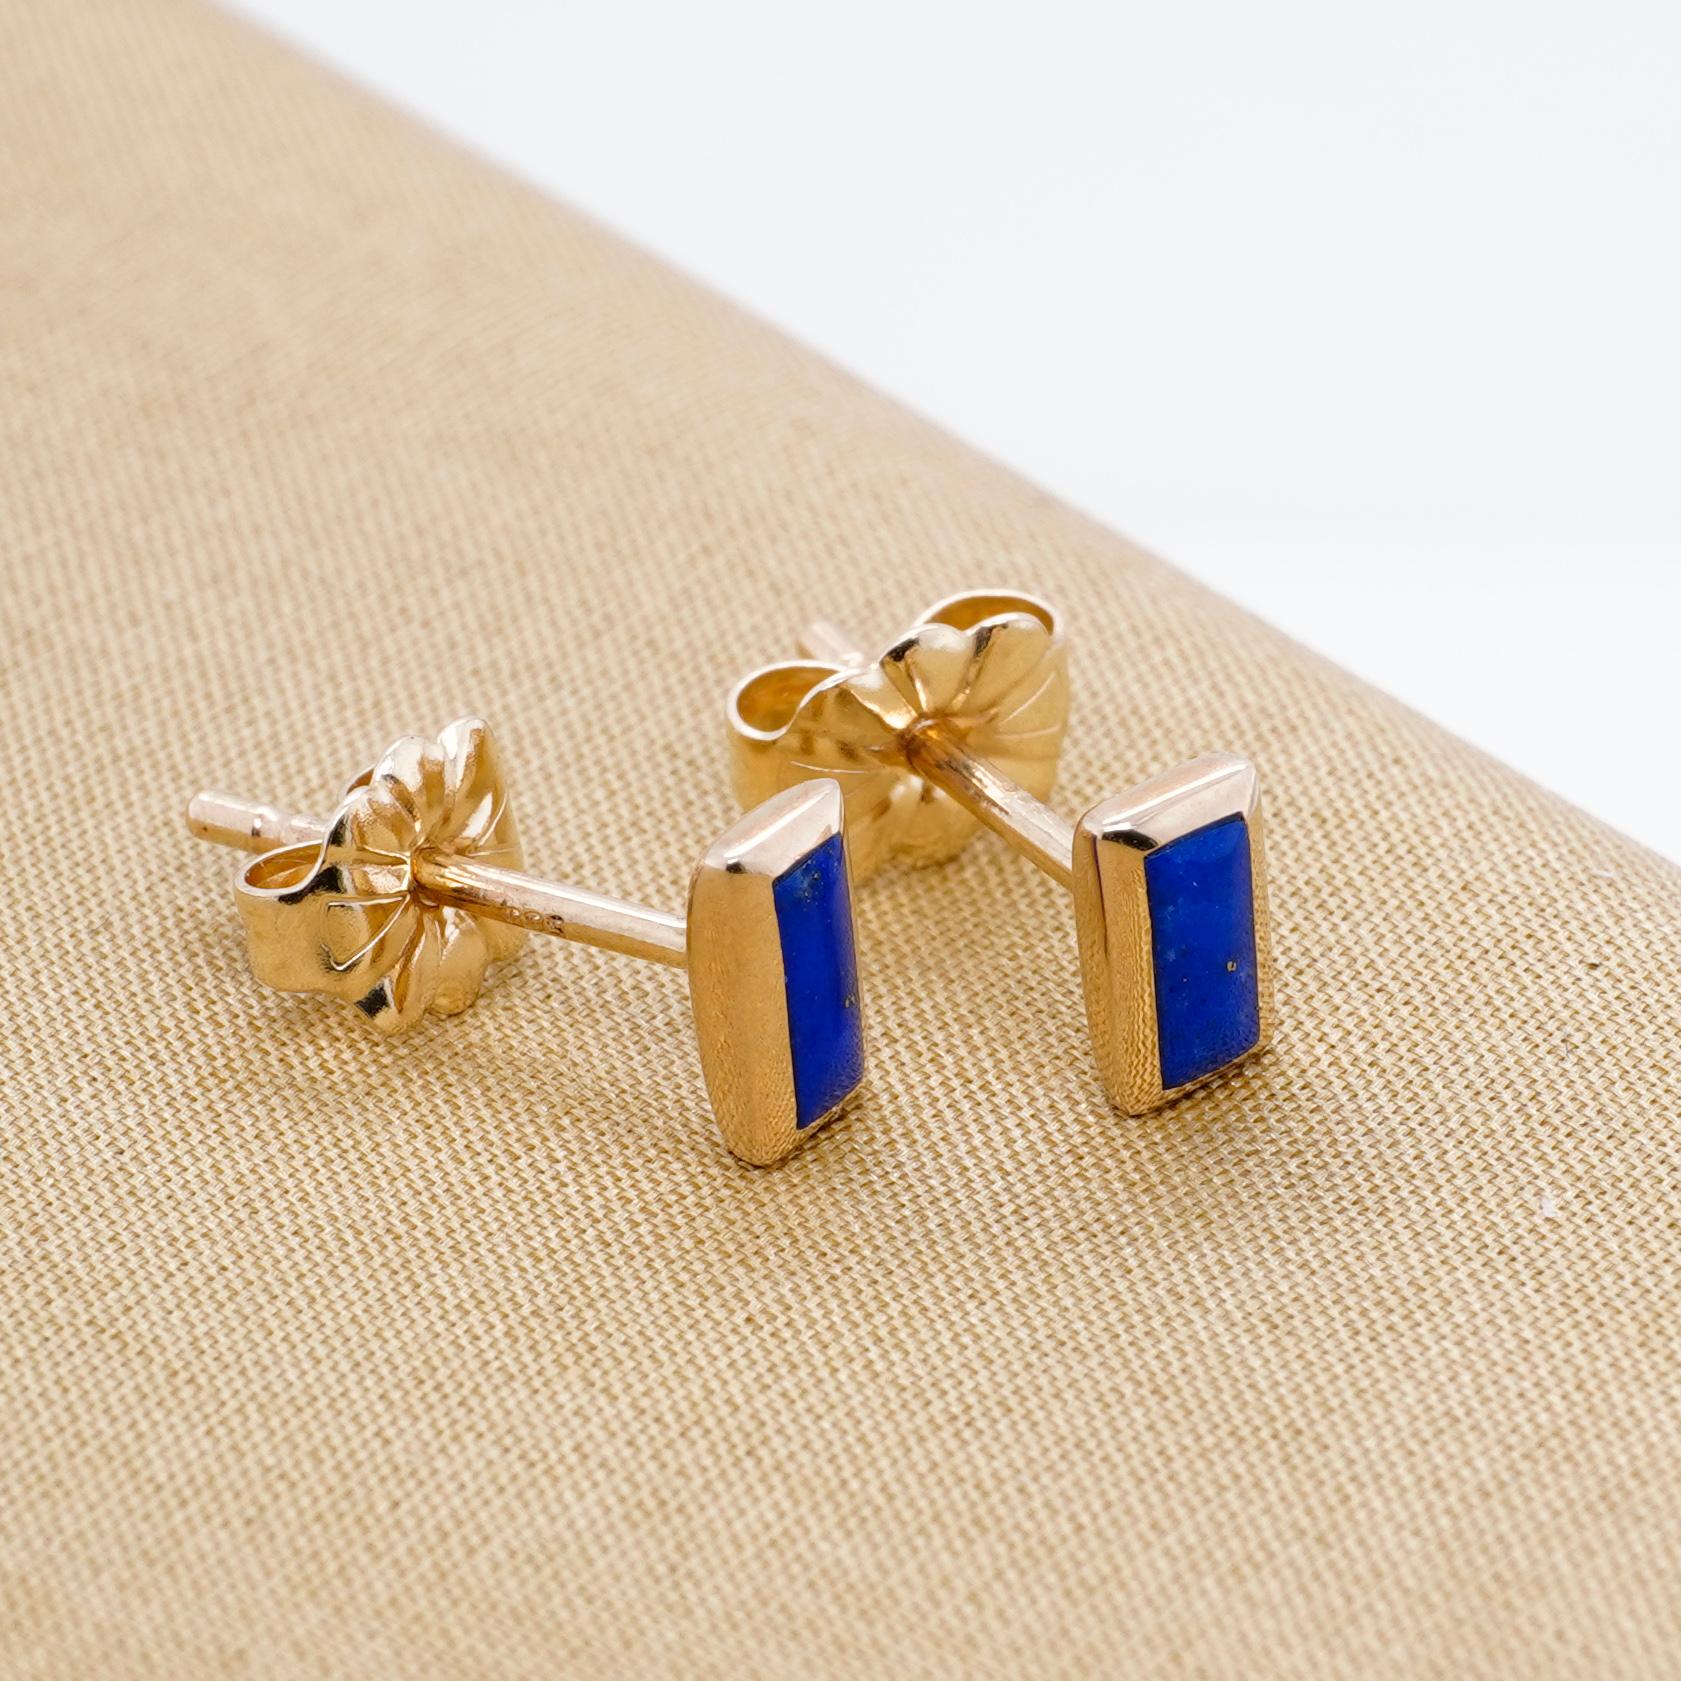 Little, Rectangular, Lapis Lazui Inlay Post Earrings 14kt Yellow Gold, by Kabana For Sale 2